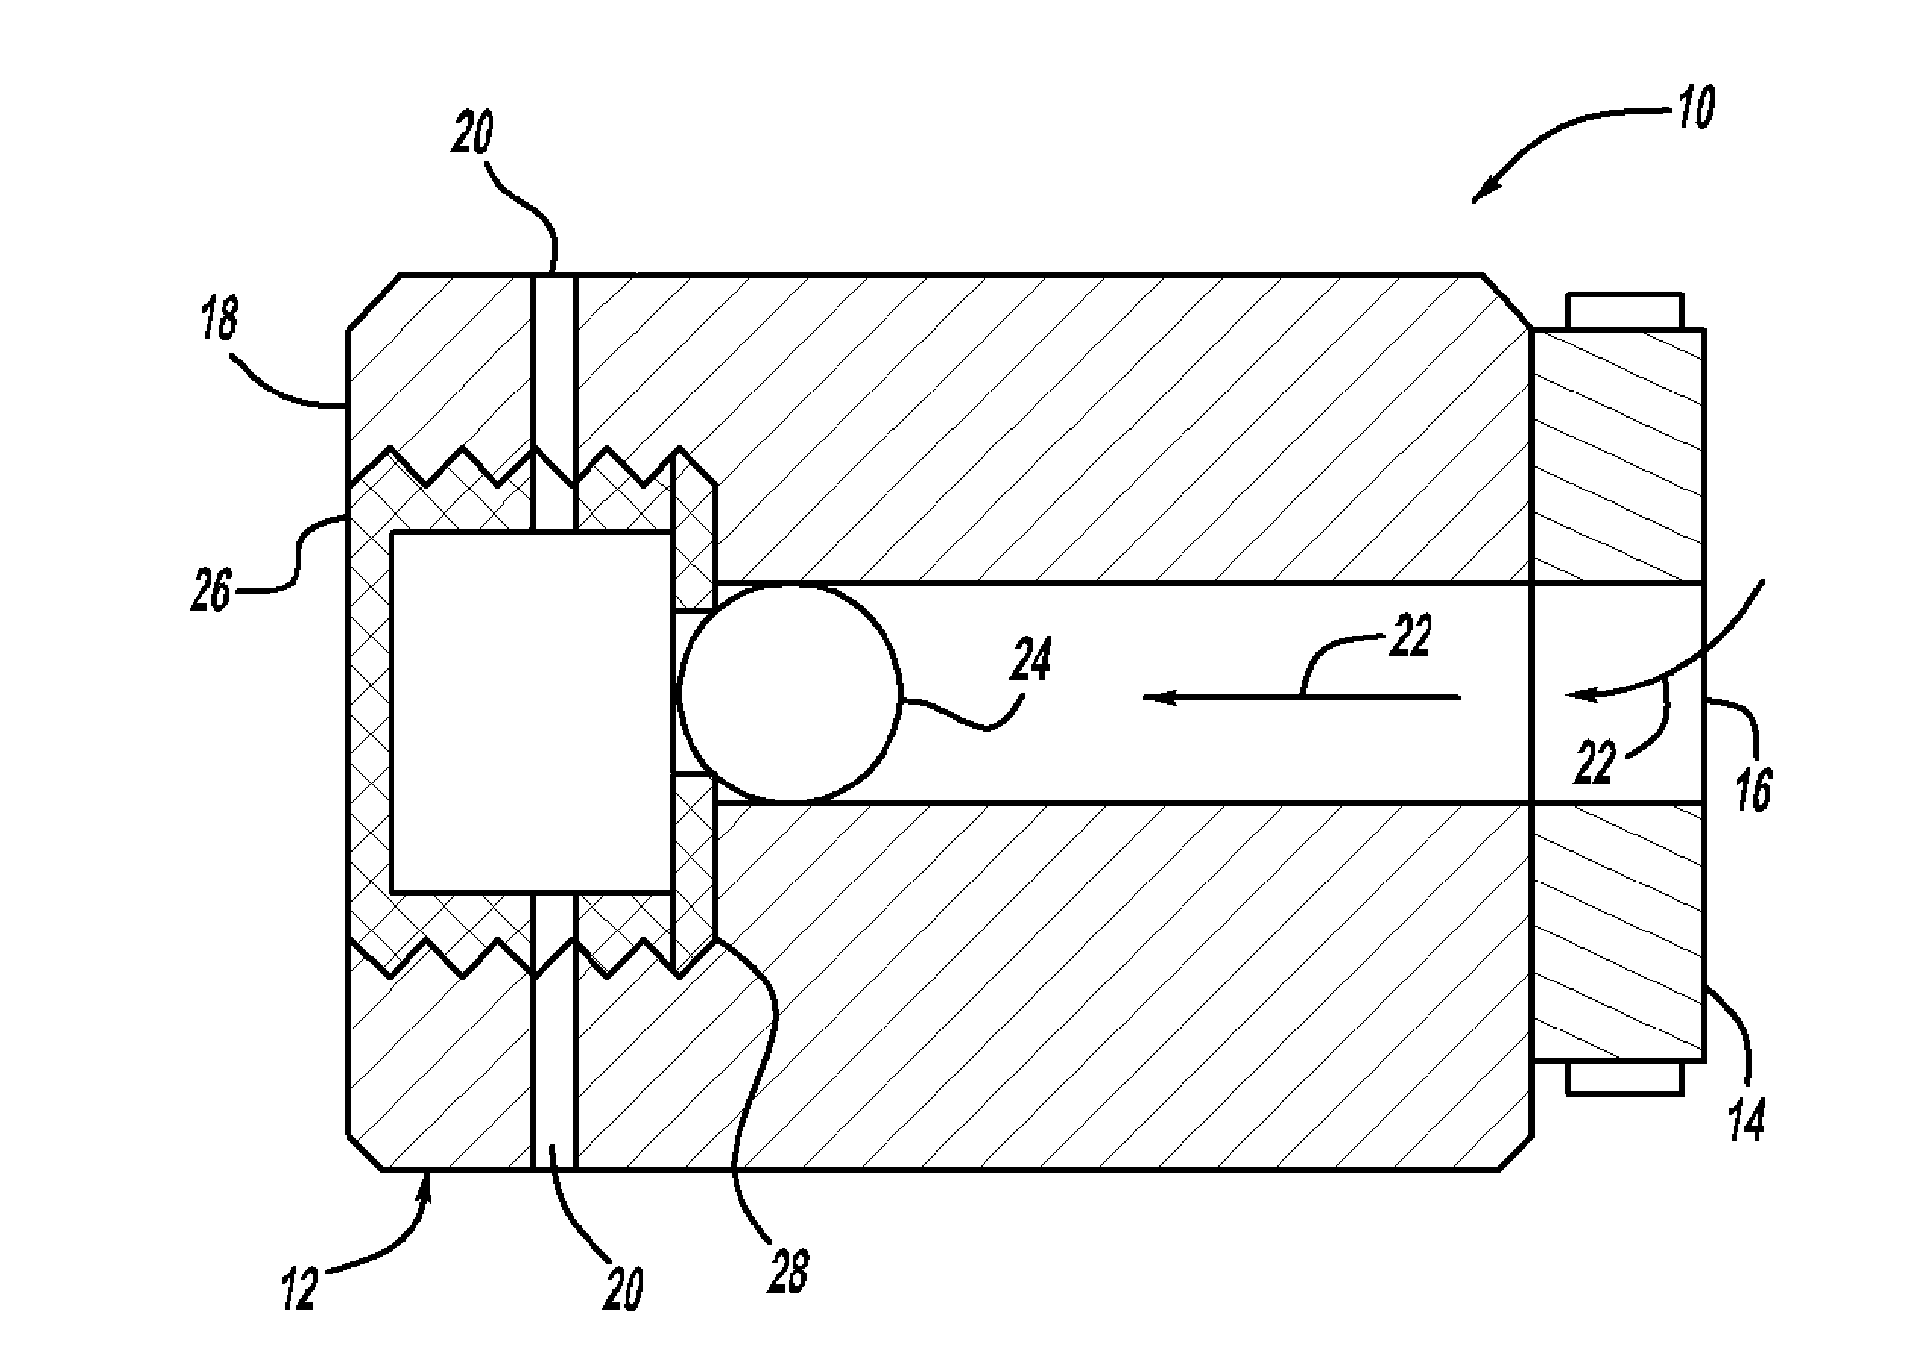 Thermal pressure relief device with expansion activation